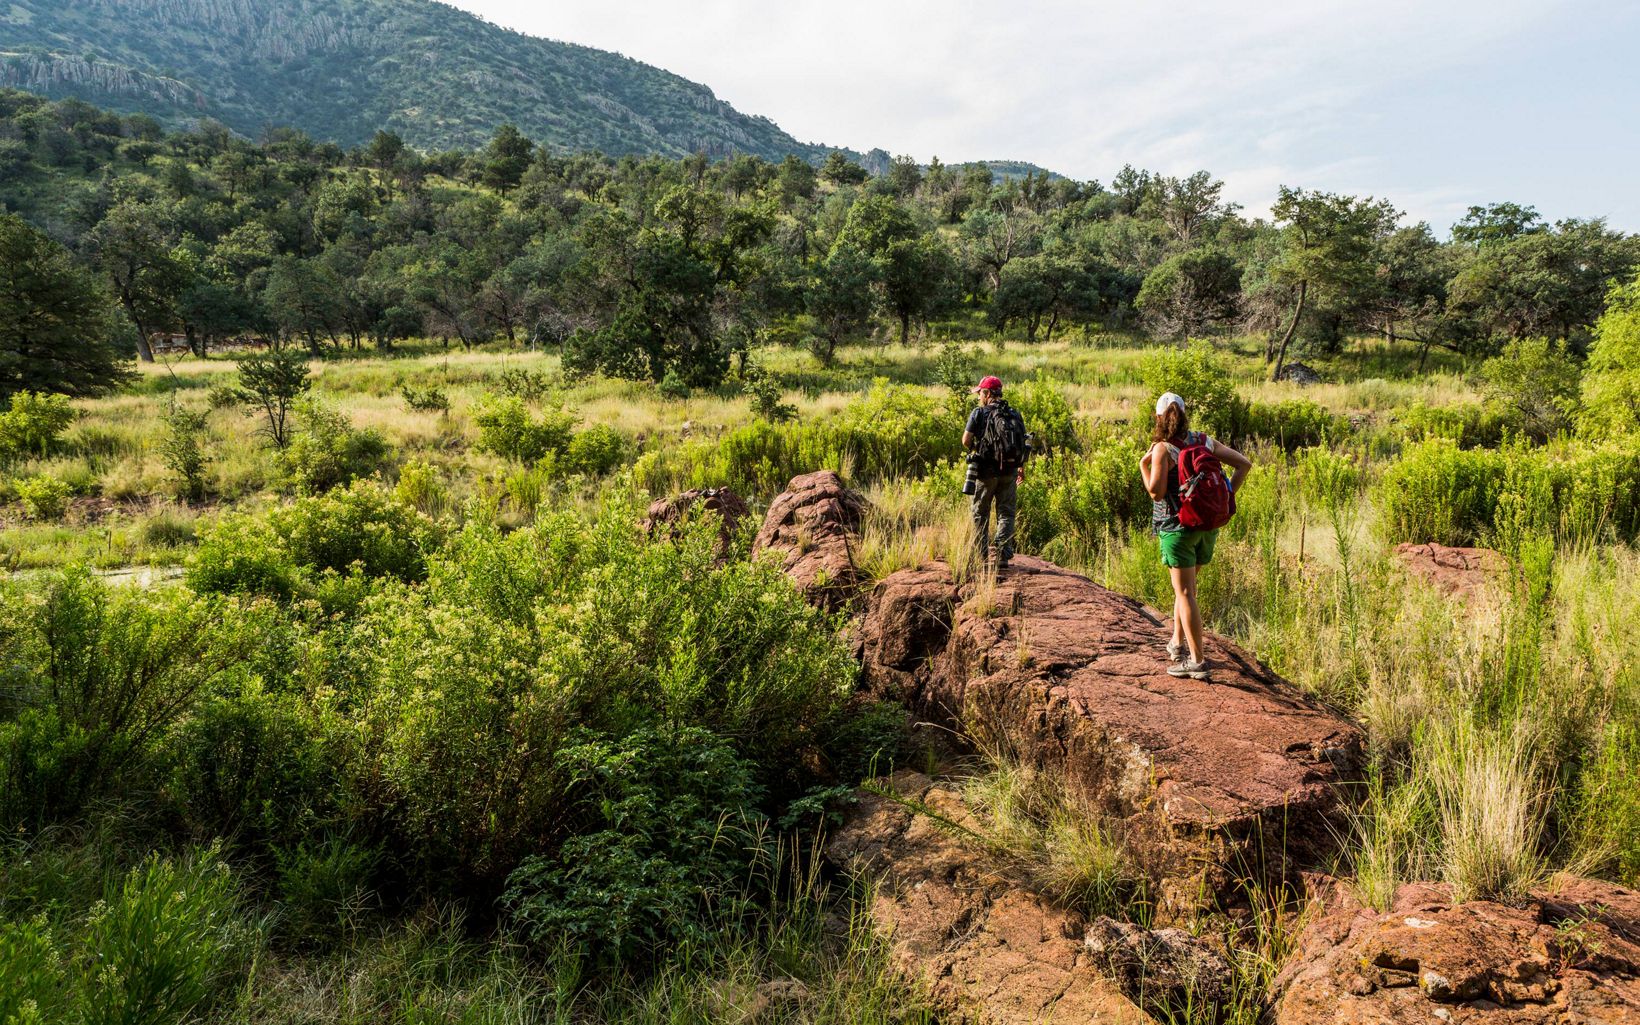 Two hikers stand on a red rock and are surrounded by green scrub bushes.